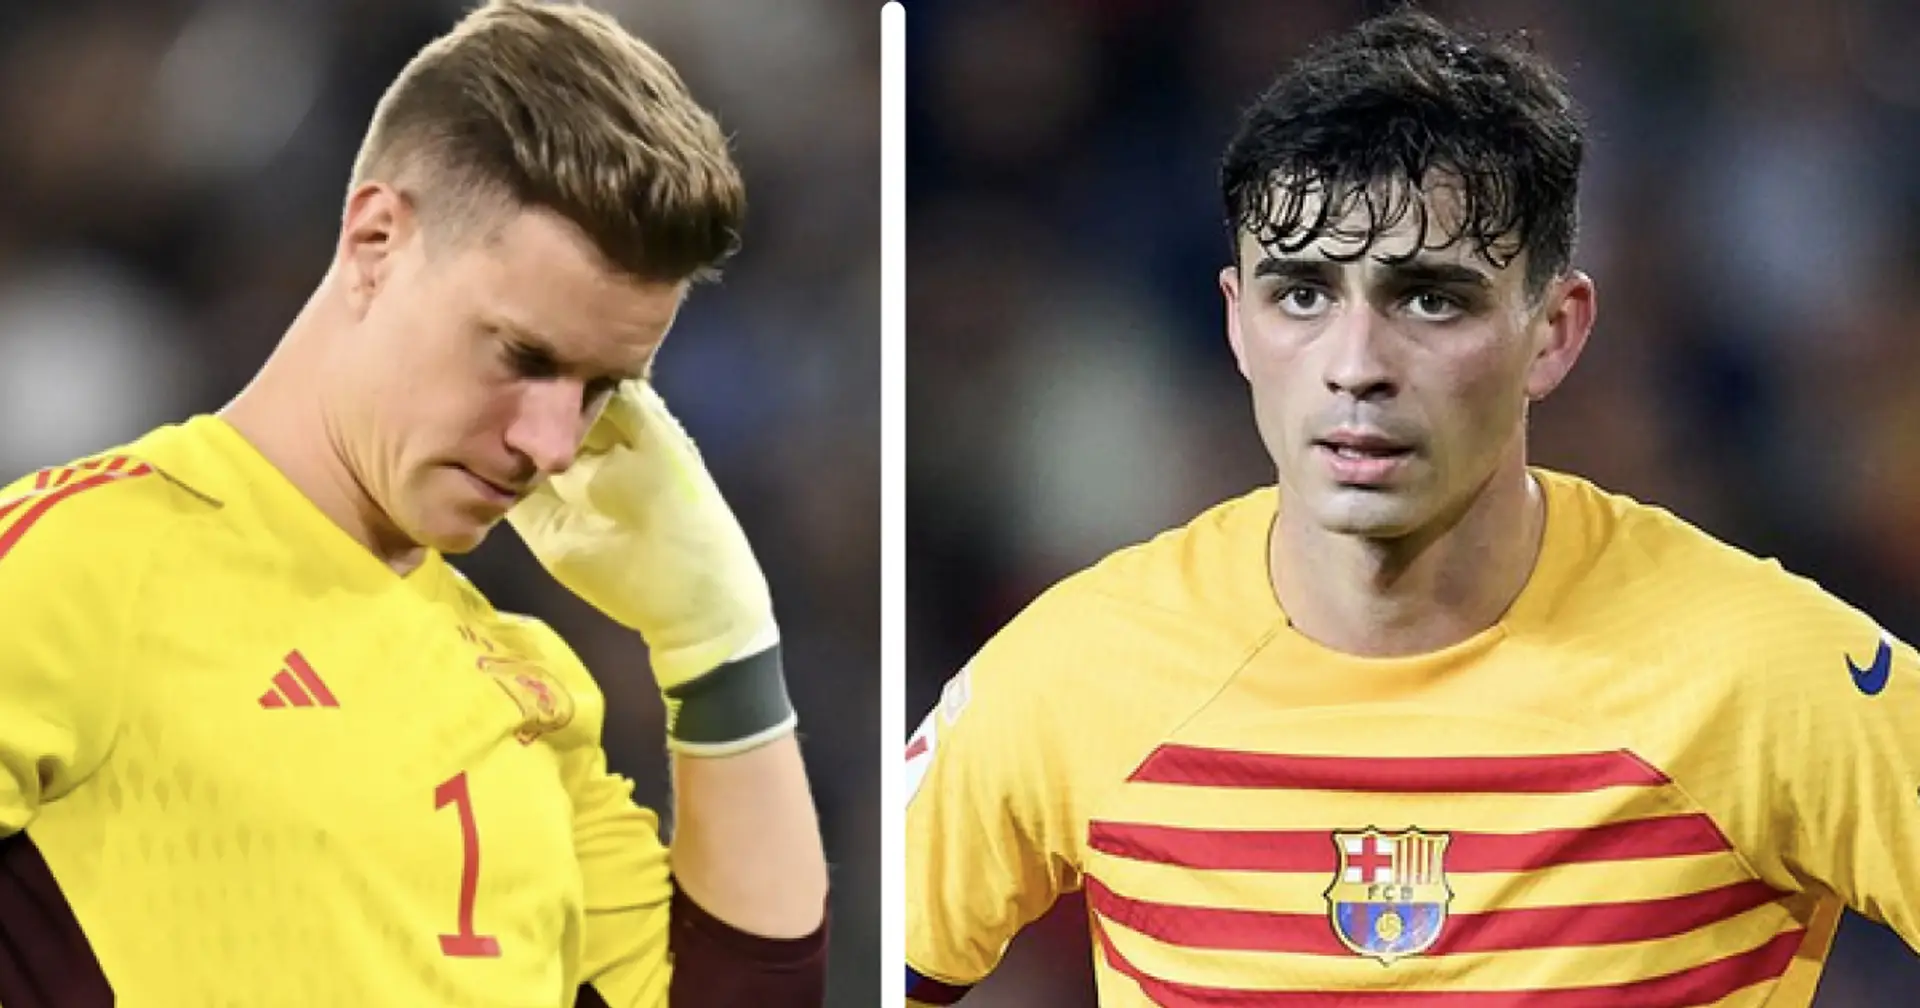 Barca's full injury list with recovery dates – now with Pedri